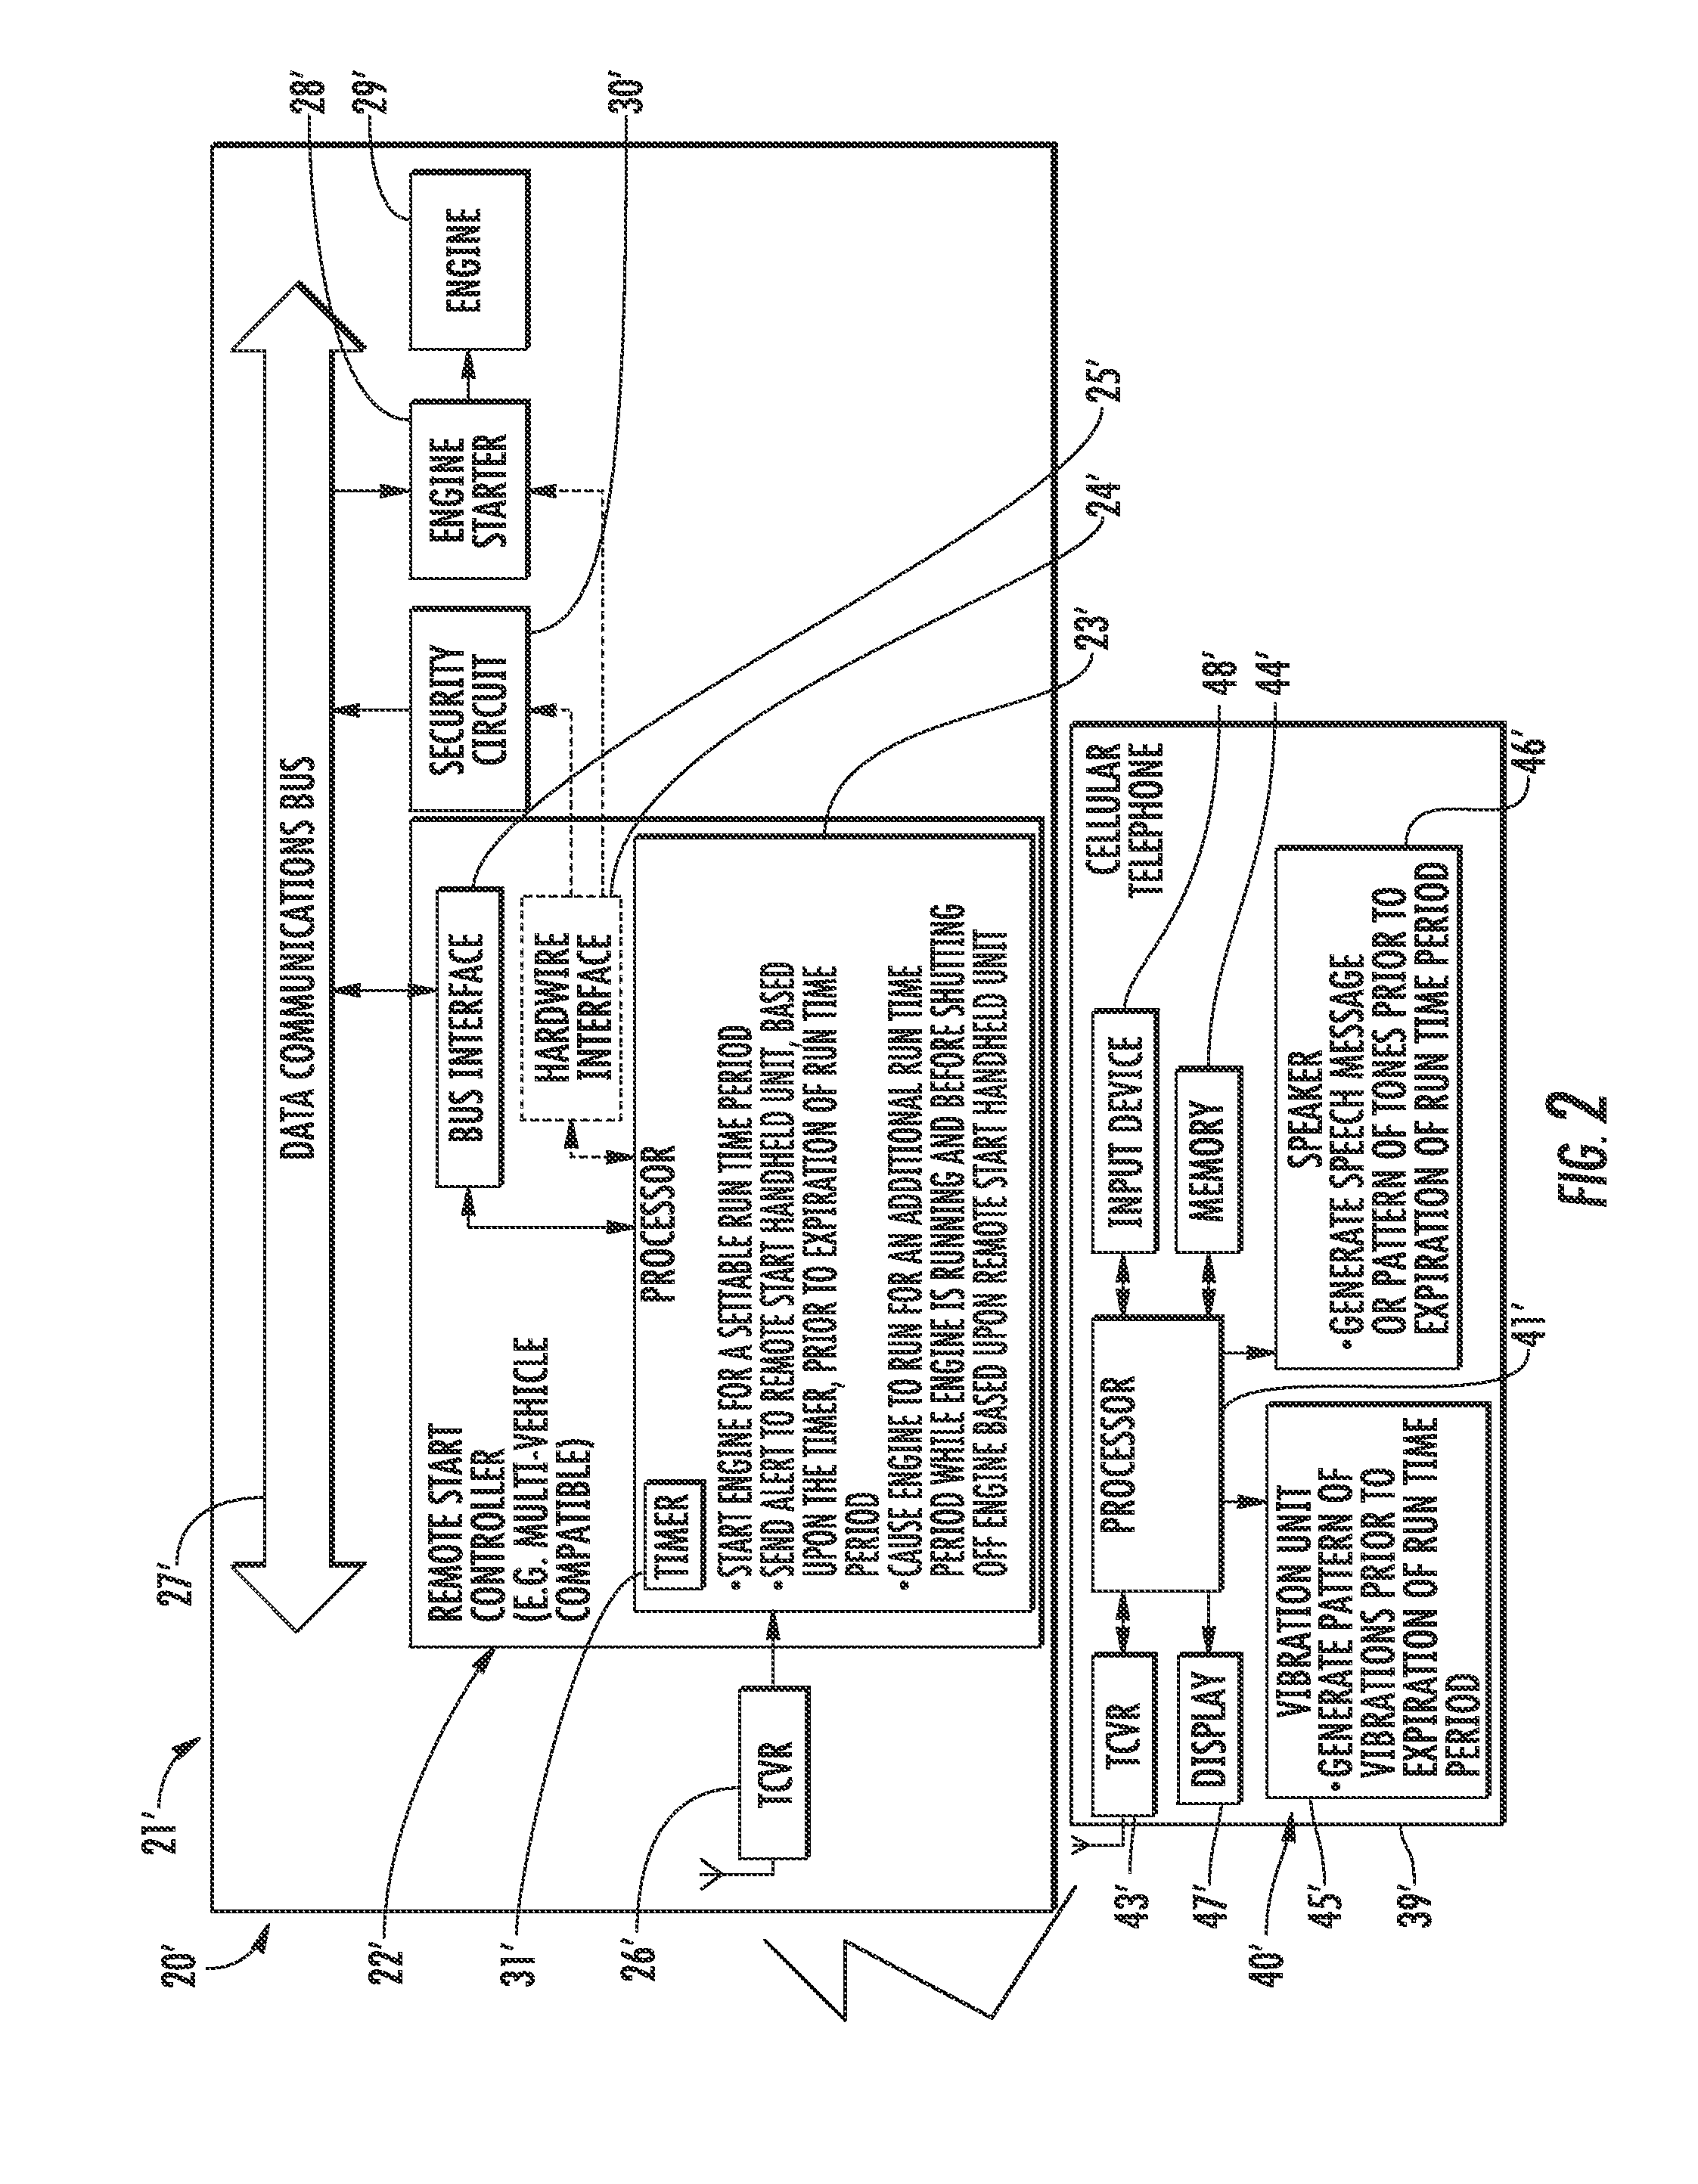 Remote climate control system providing an indication relating to remote climate control operation and associated methods